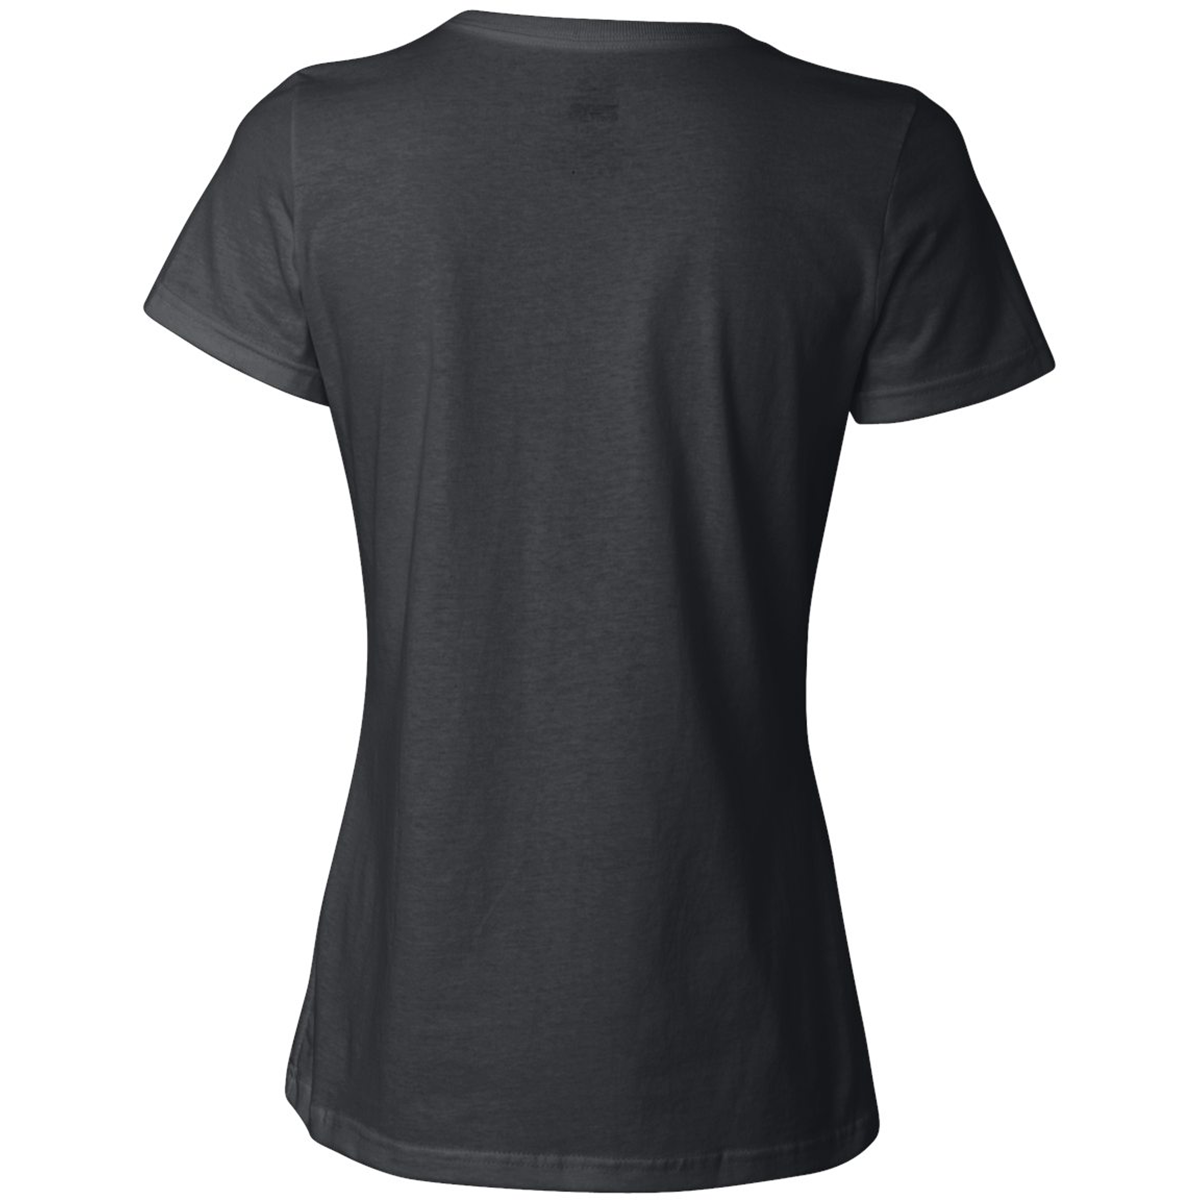 Inktastic Fitness Training Exercise Gift Women's T-Shirt - image 4 of 4